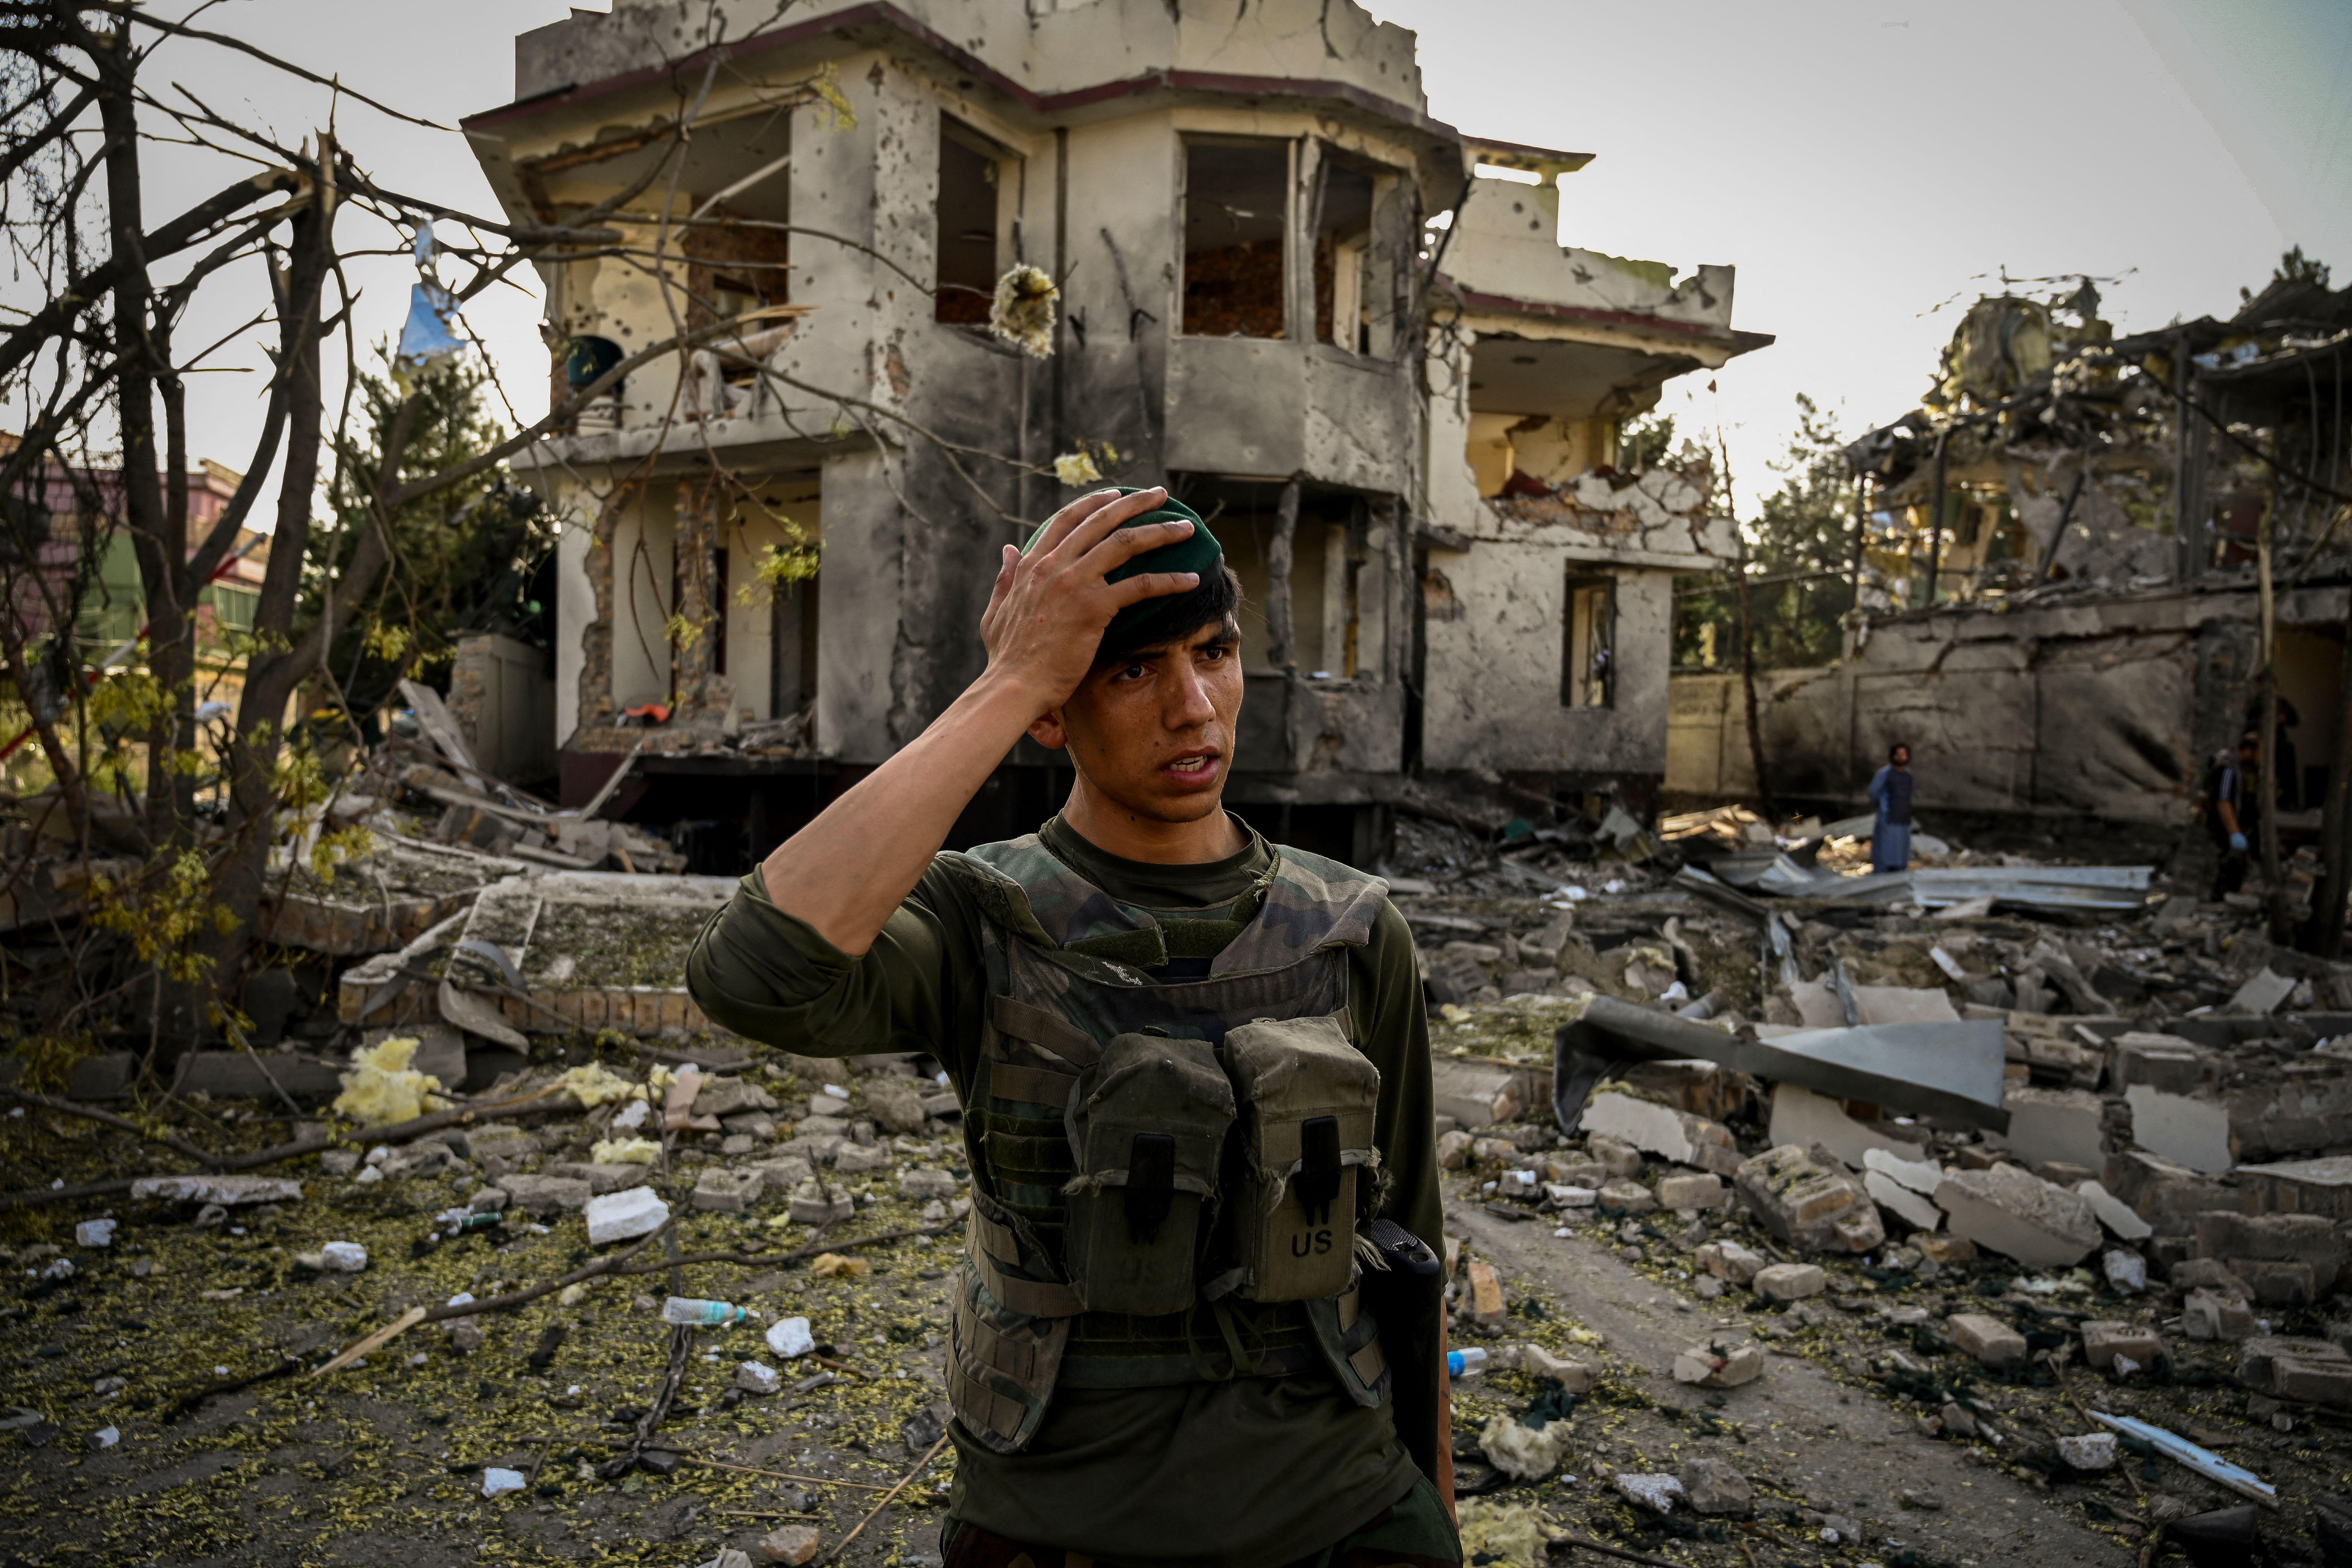 An Afghan man wearing U.S. military gear stands in front of rubble putting his right hand to his head in apparent dismay